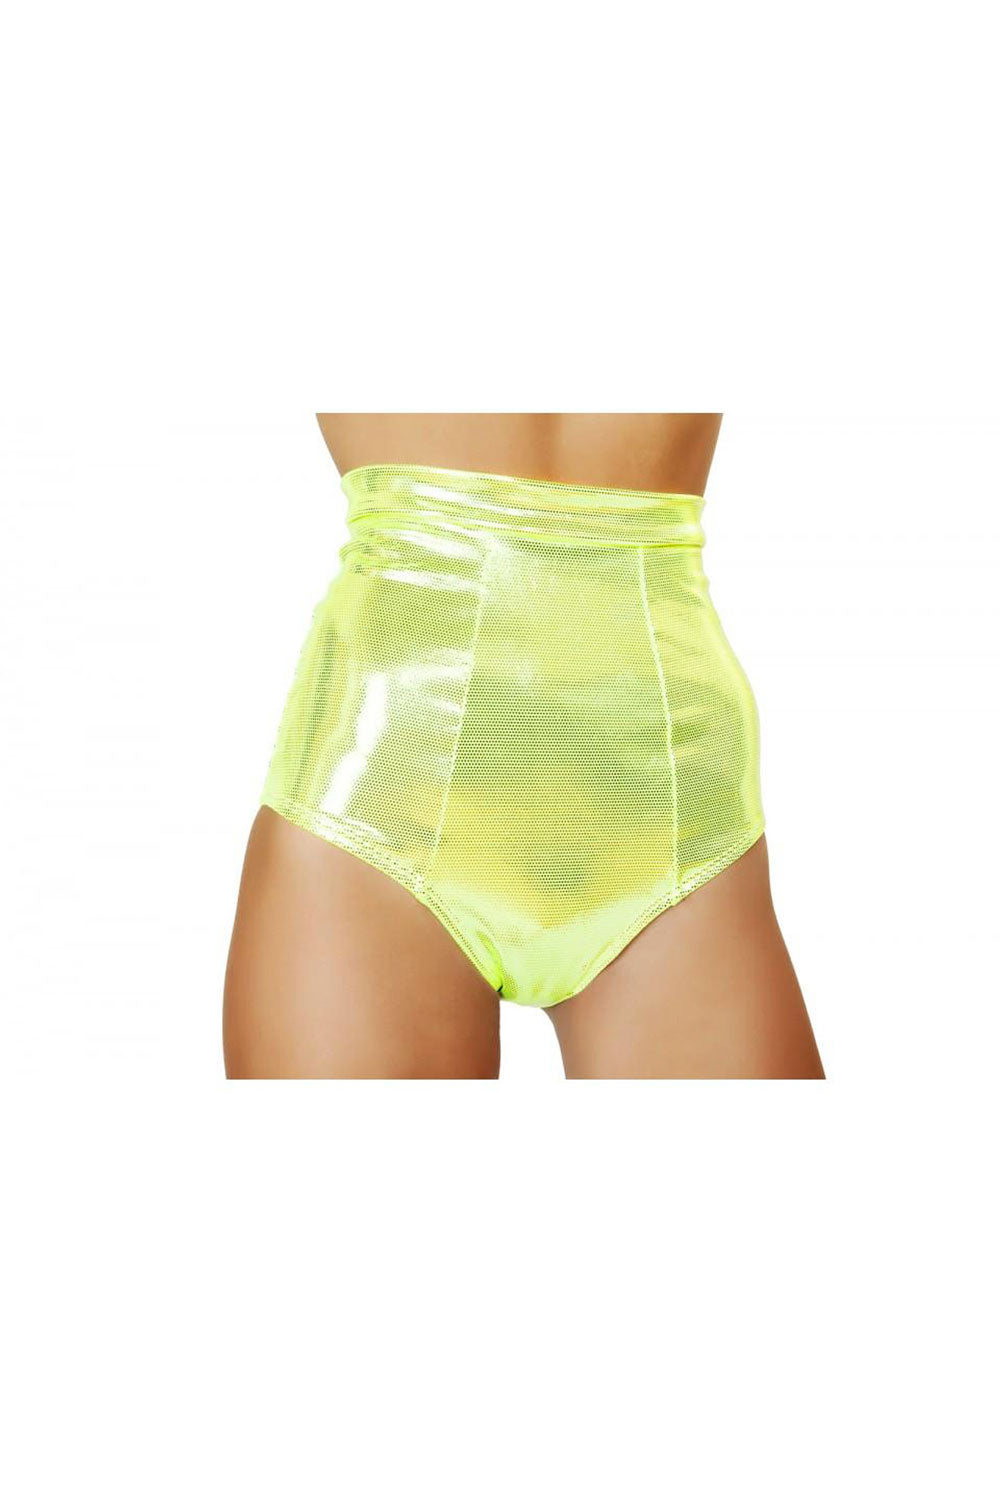 High-Waist Banded Retro Booty Shorts Sequins Design EDM Rave Party Roma  SH3124